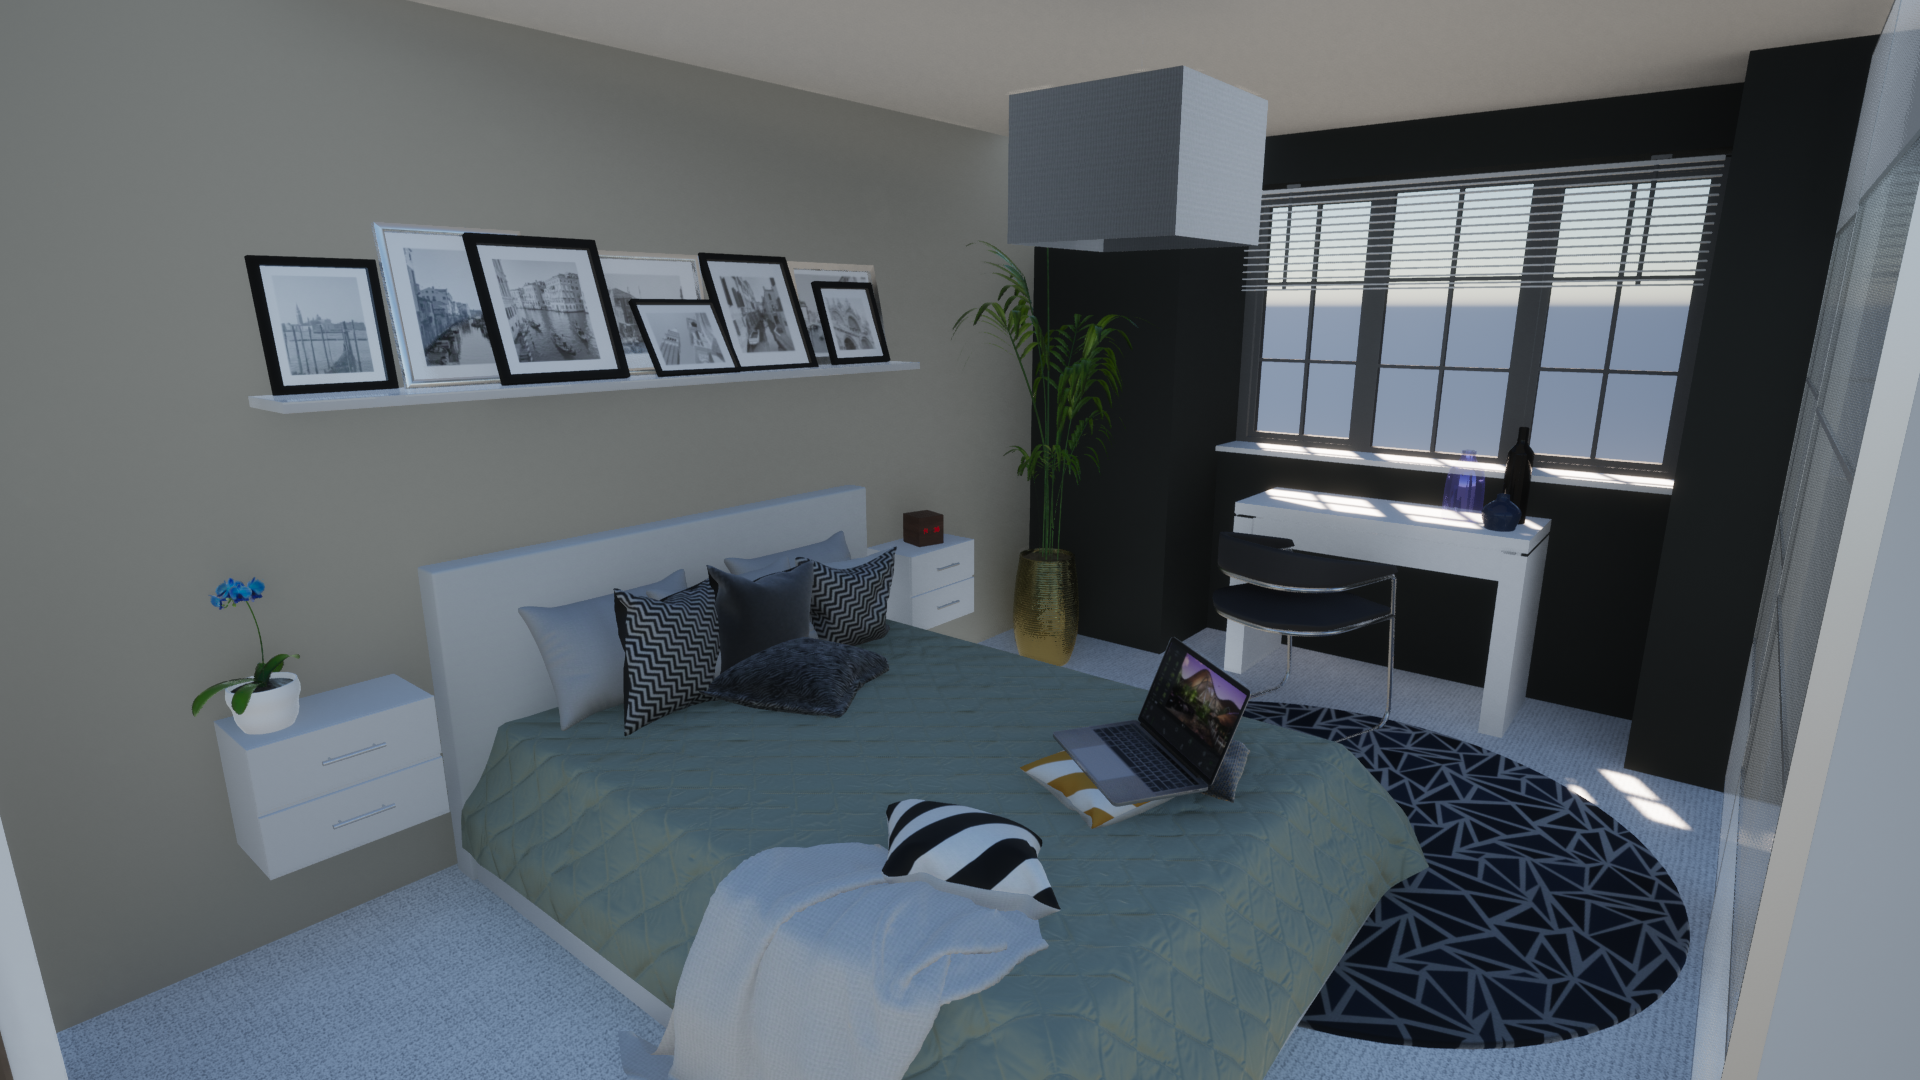 Proposed Bedroom